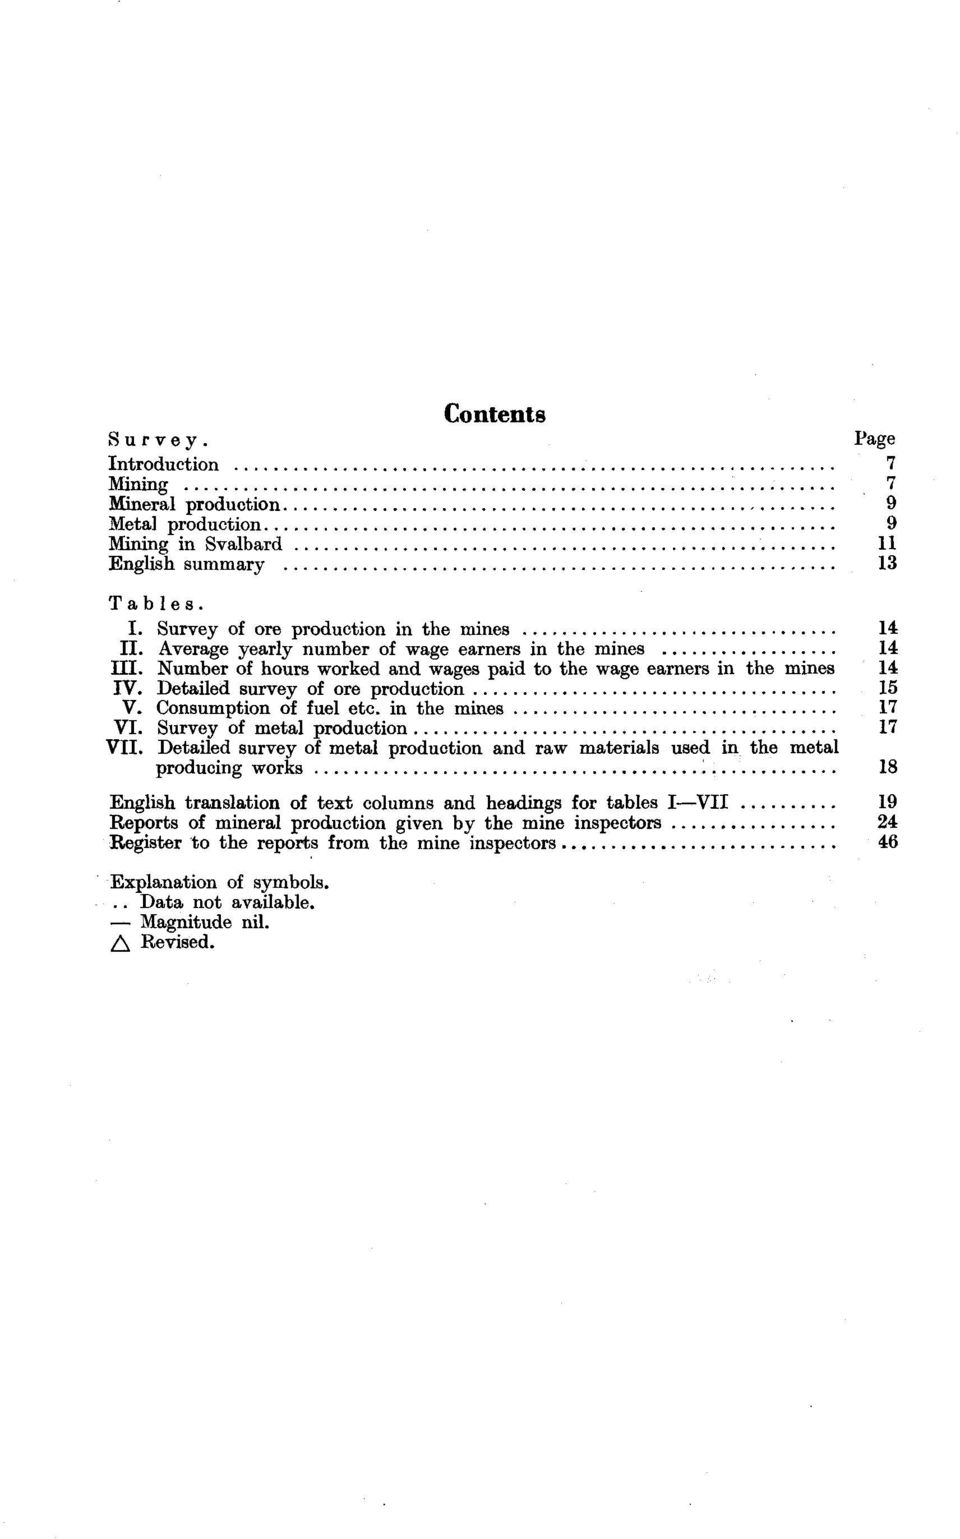 Consumption of fuel etc. in the mines 17 VI. Survey of metal production 17 VII.